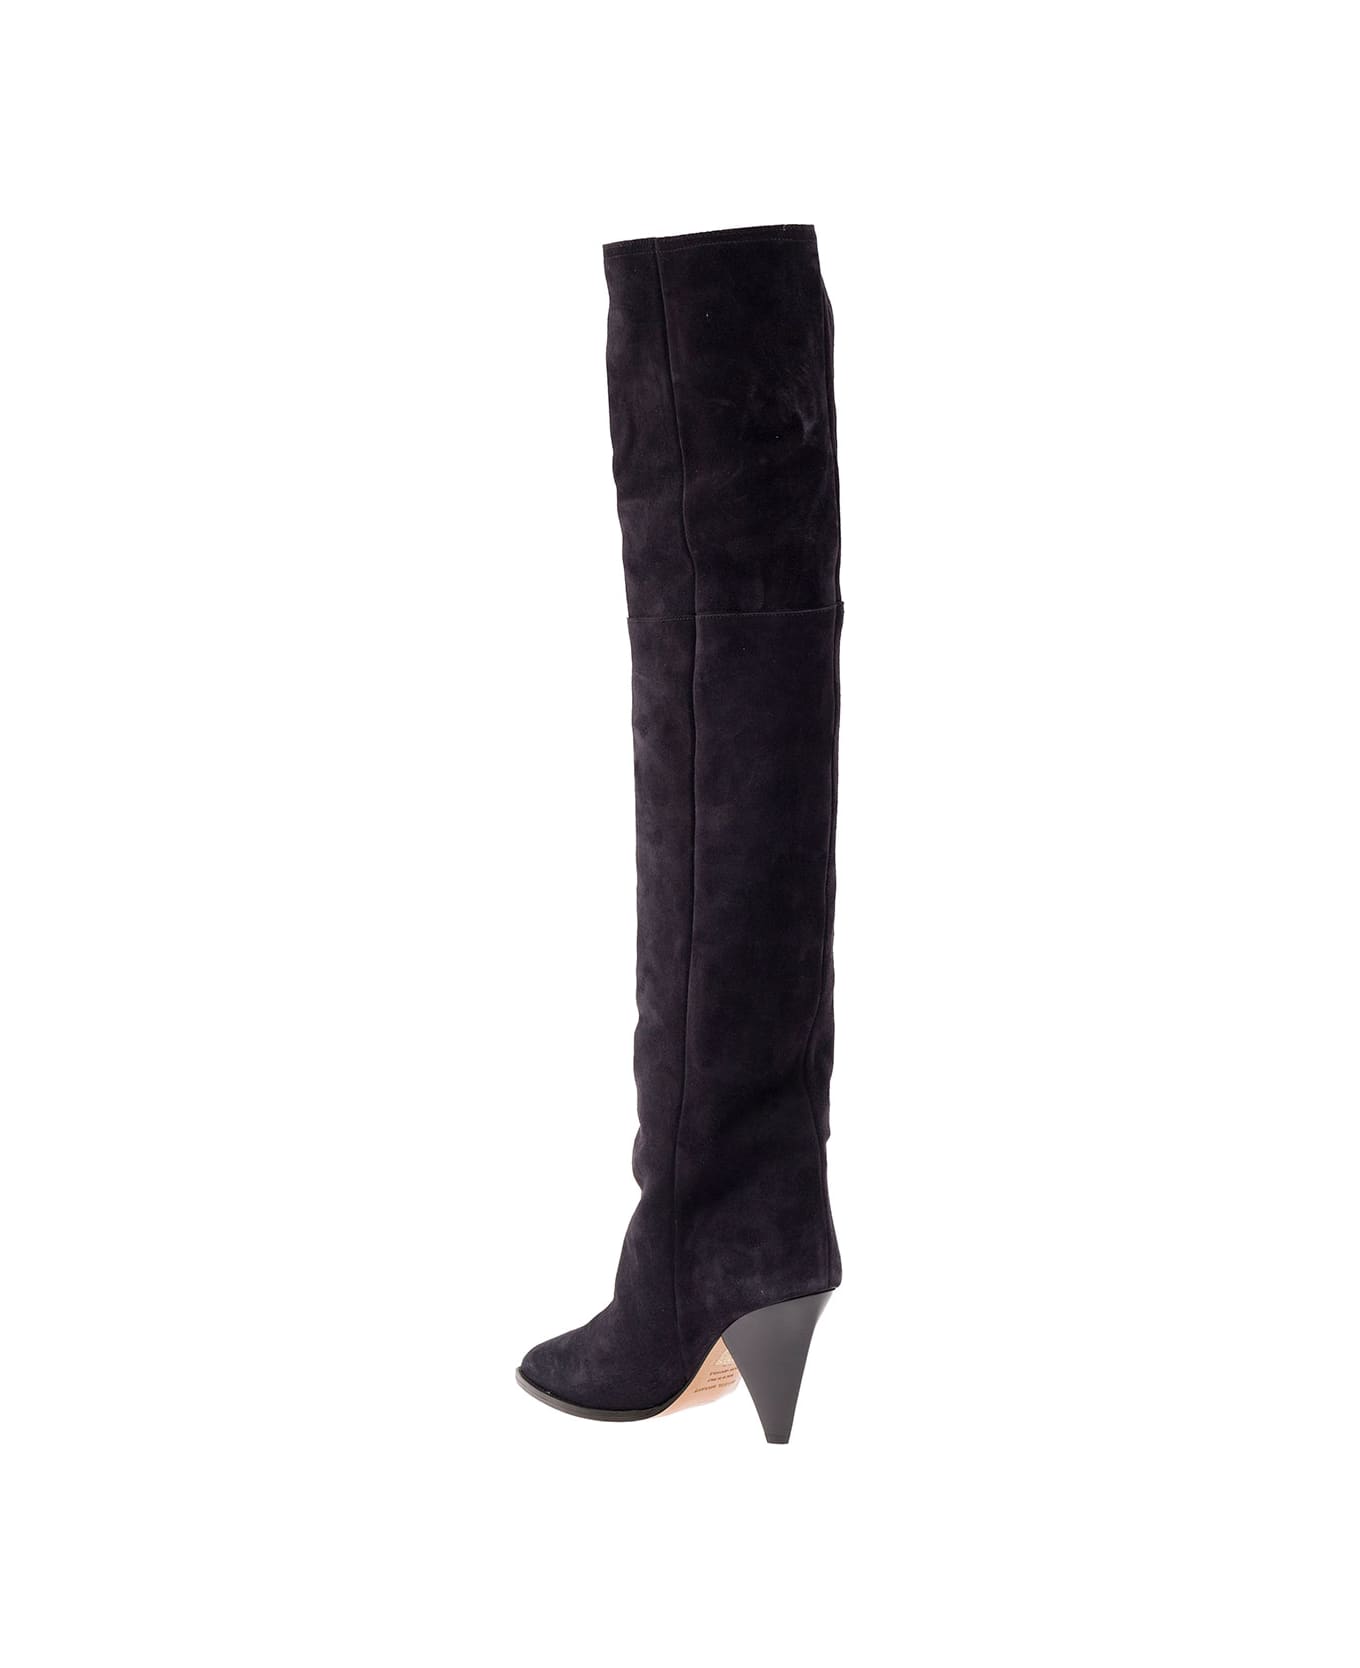 Isabel Marant Riria Black Cuissardes In Suede With Conical Heel Woman ブーツ